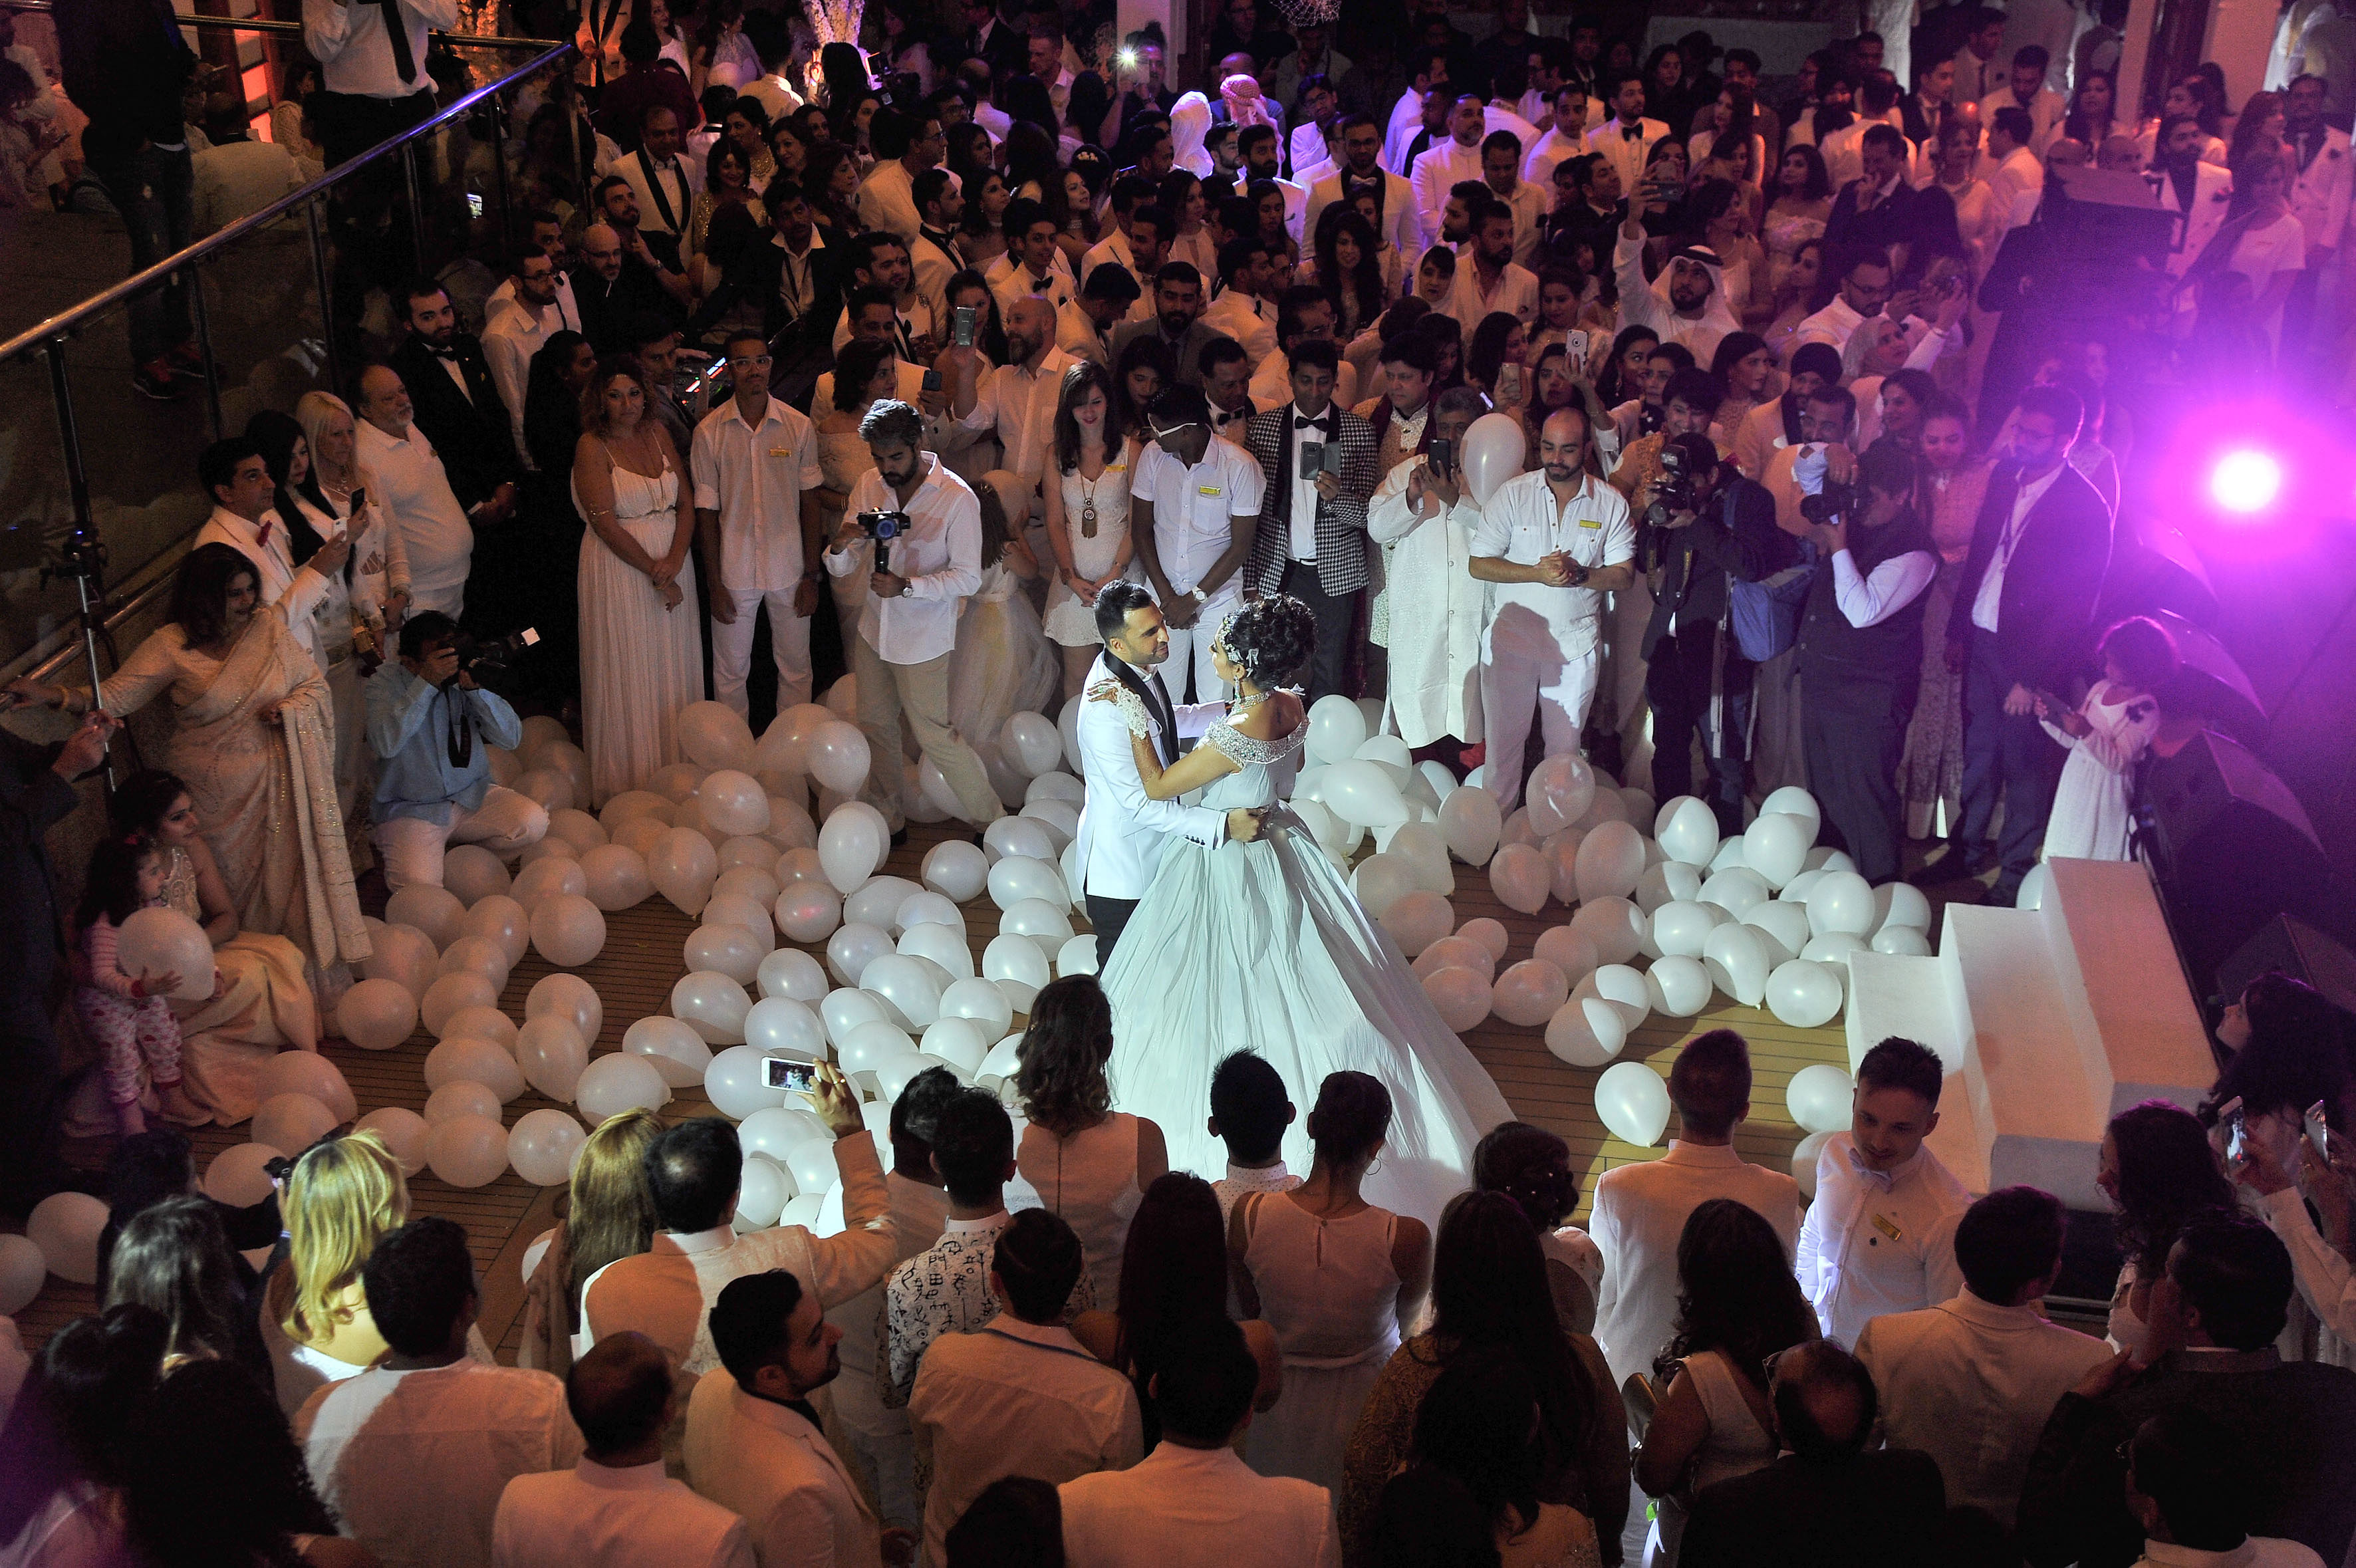 Cruise weddings offer novelty and convenience. (Above) Scenes from a wedding organised by Costa Cruises India.